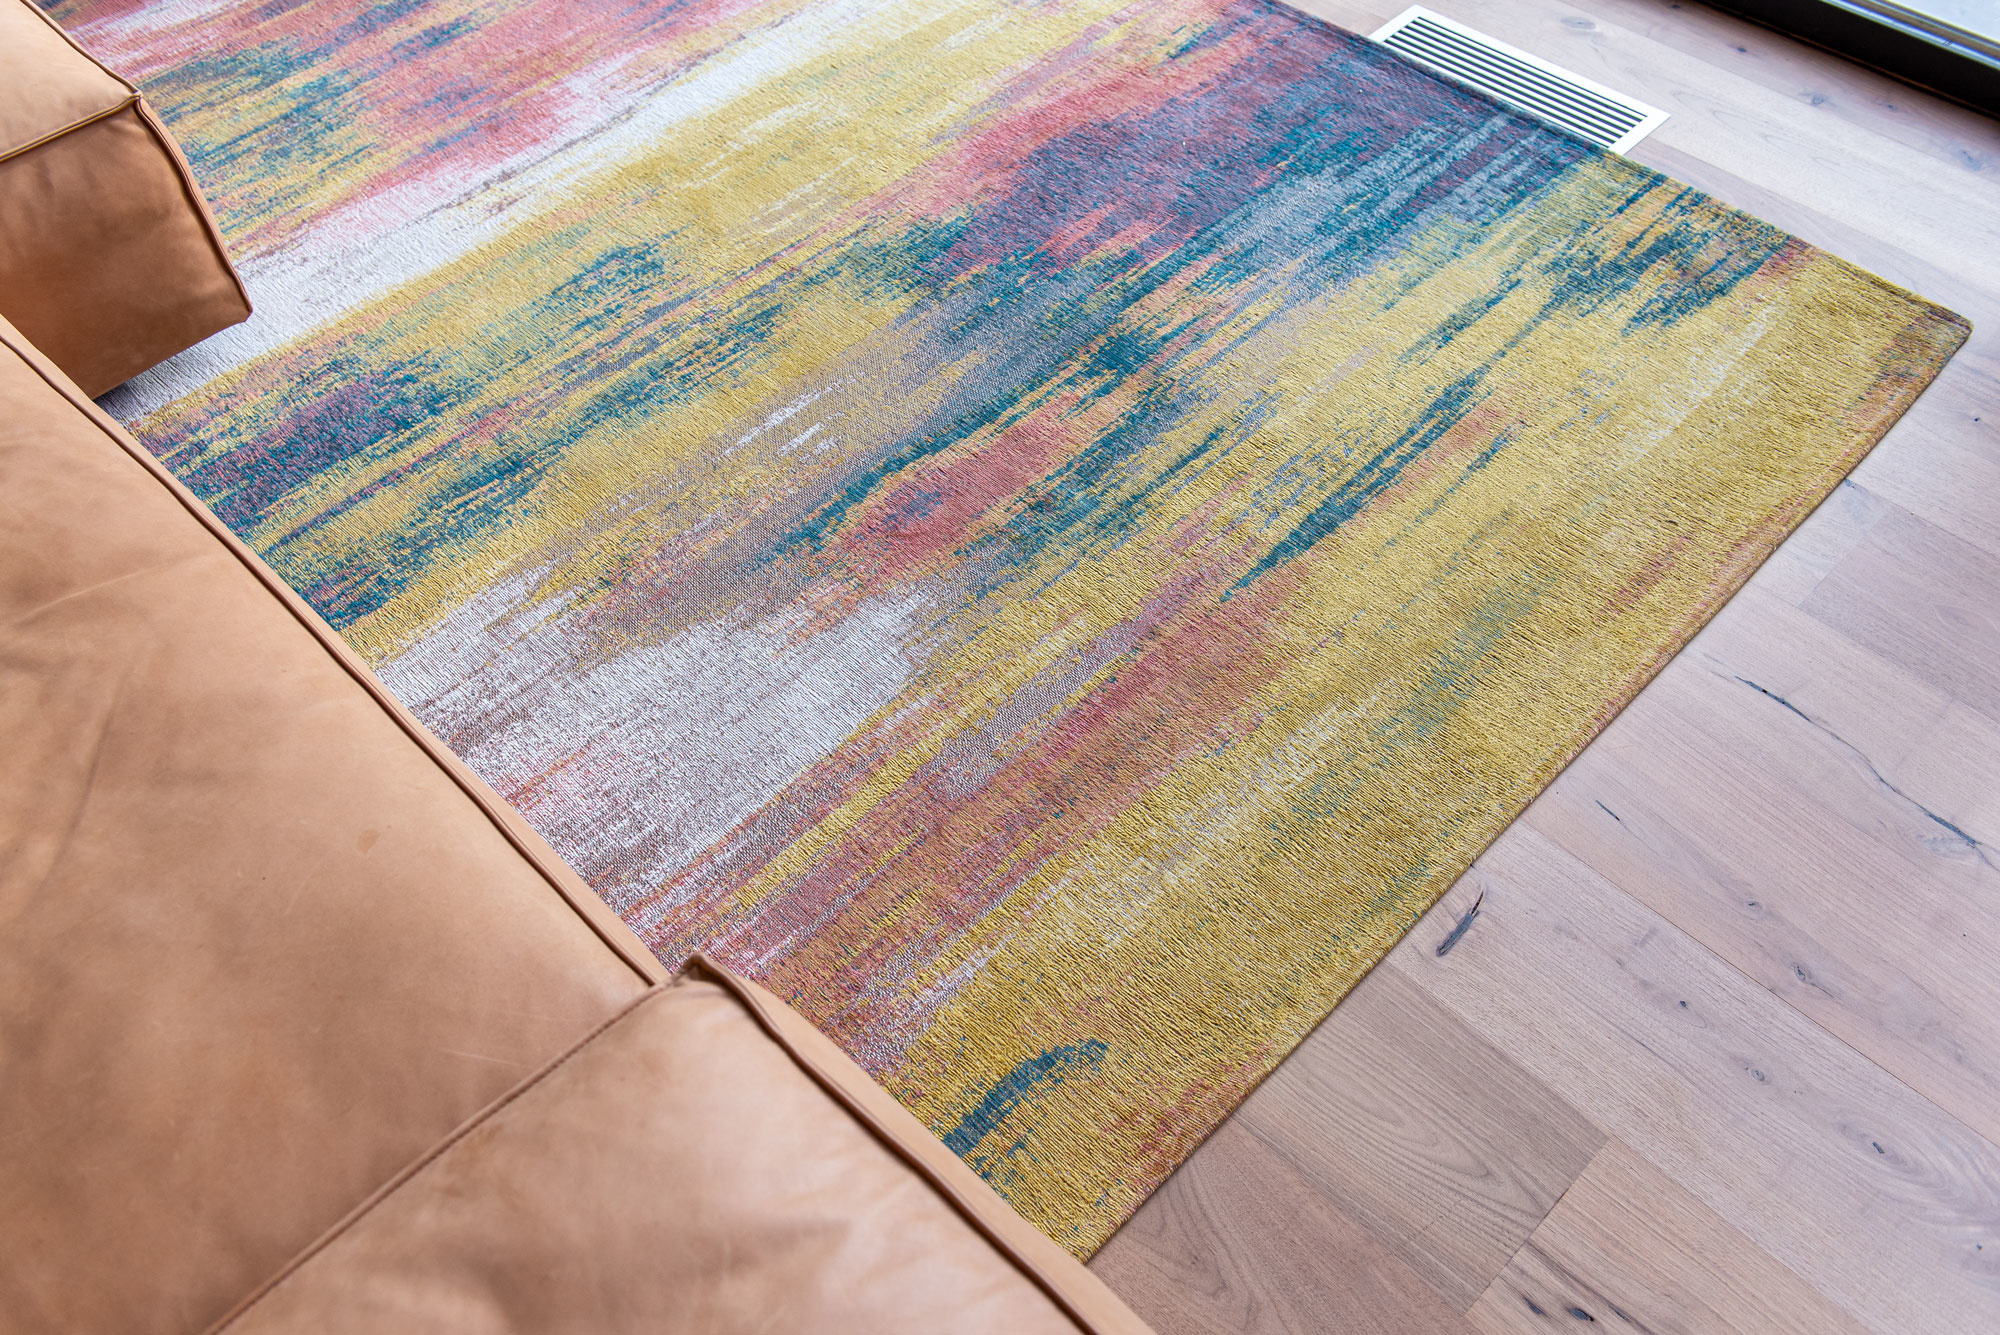 Abstract Flatwoven Mix Rug ☞ Size: 6' 7" x 9' 2" (200 x 280 cm)